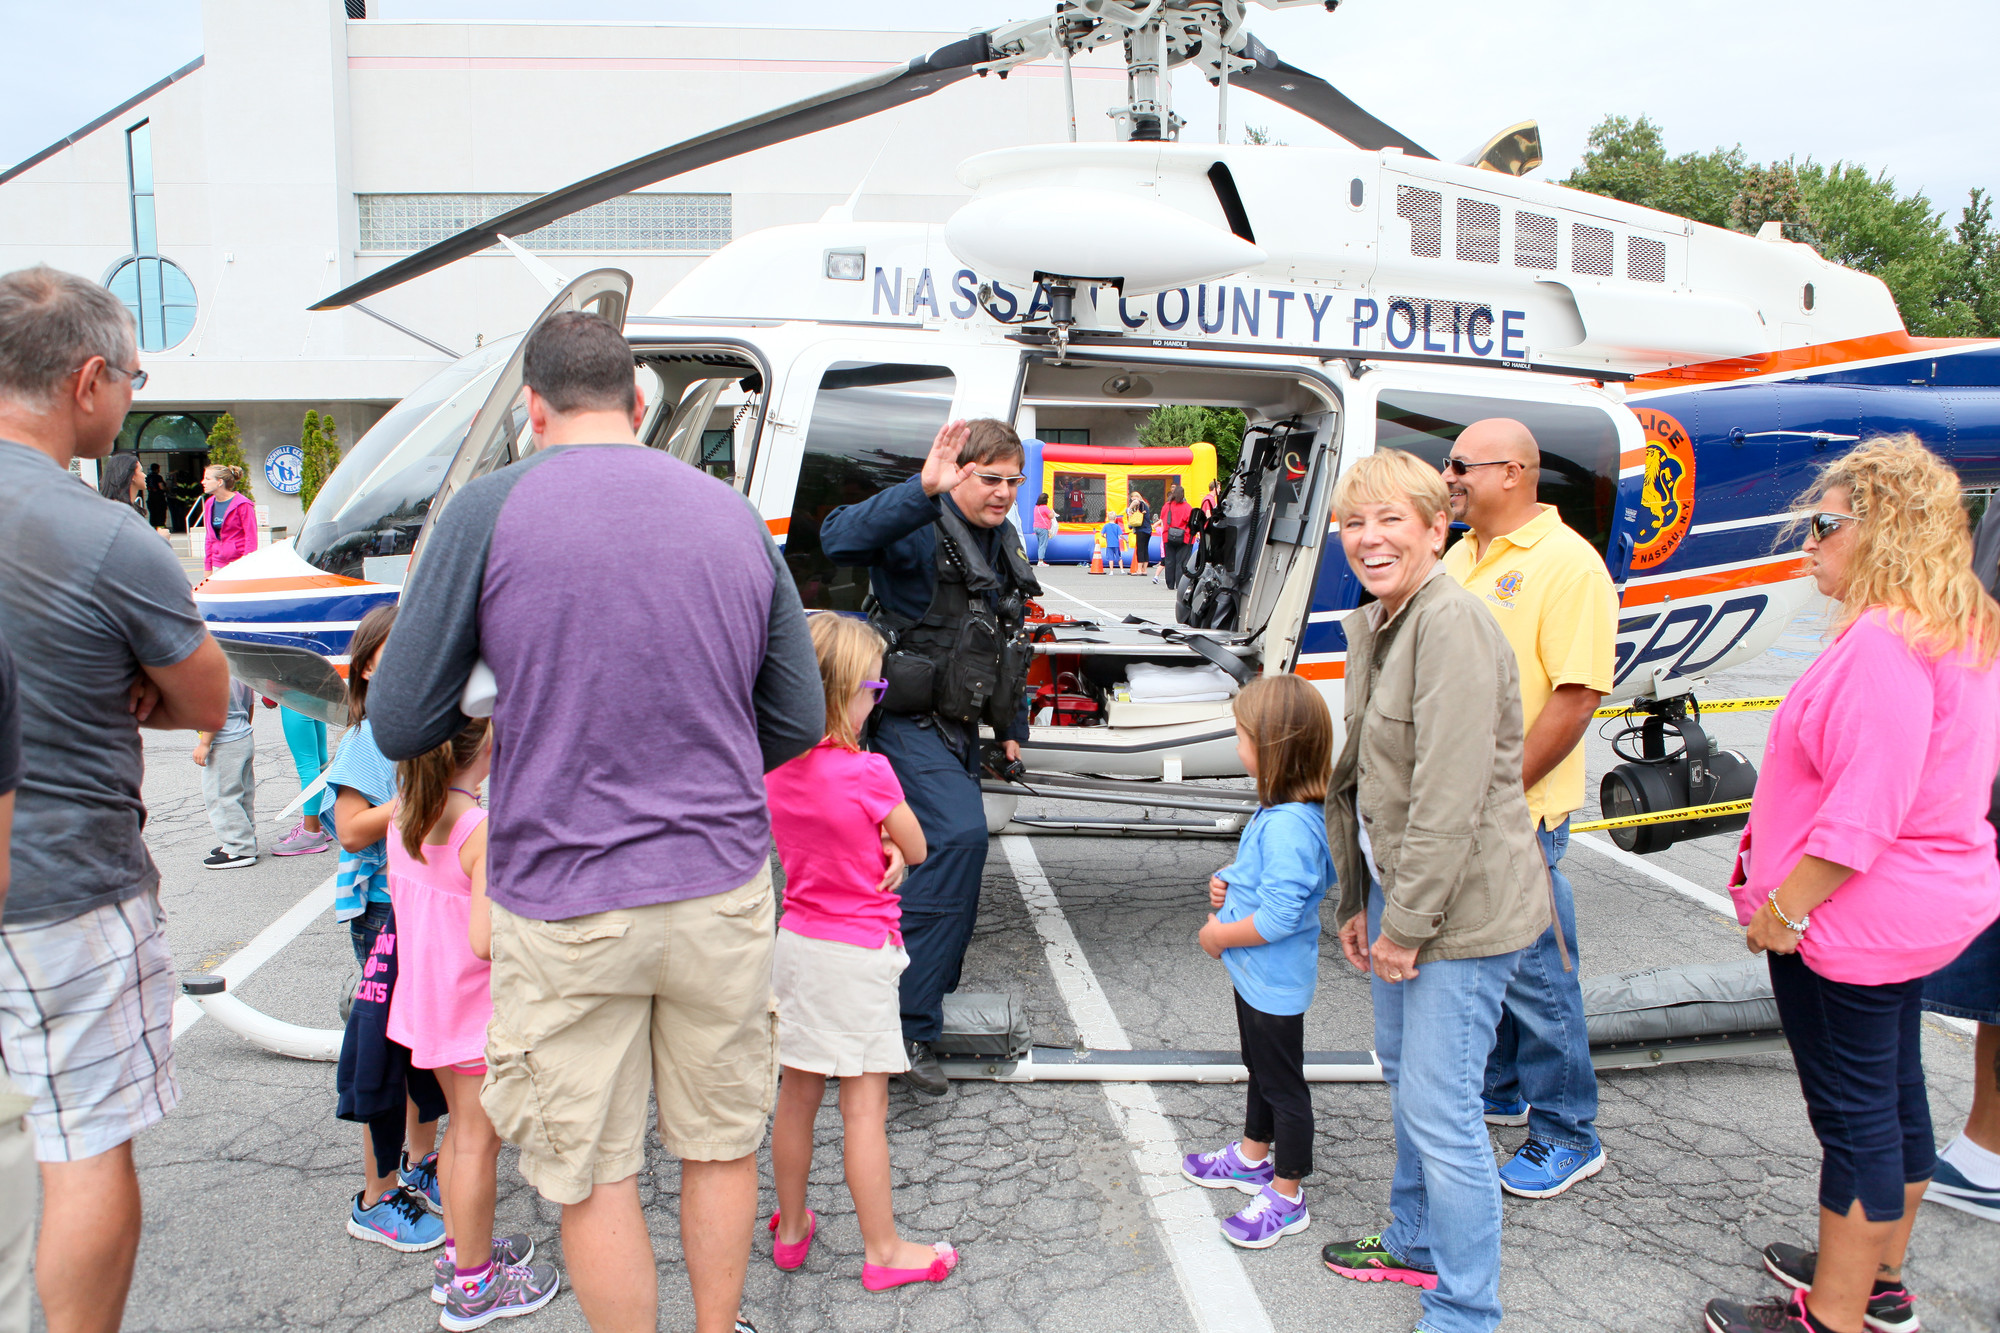 Parents and children were able to inspect the inside of the Nassau County Police helicopter after it landed.